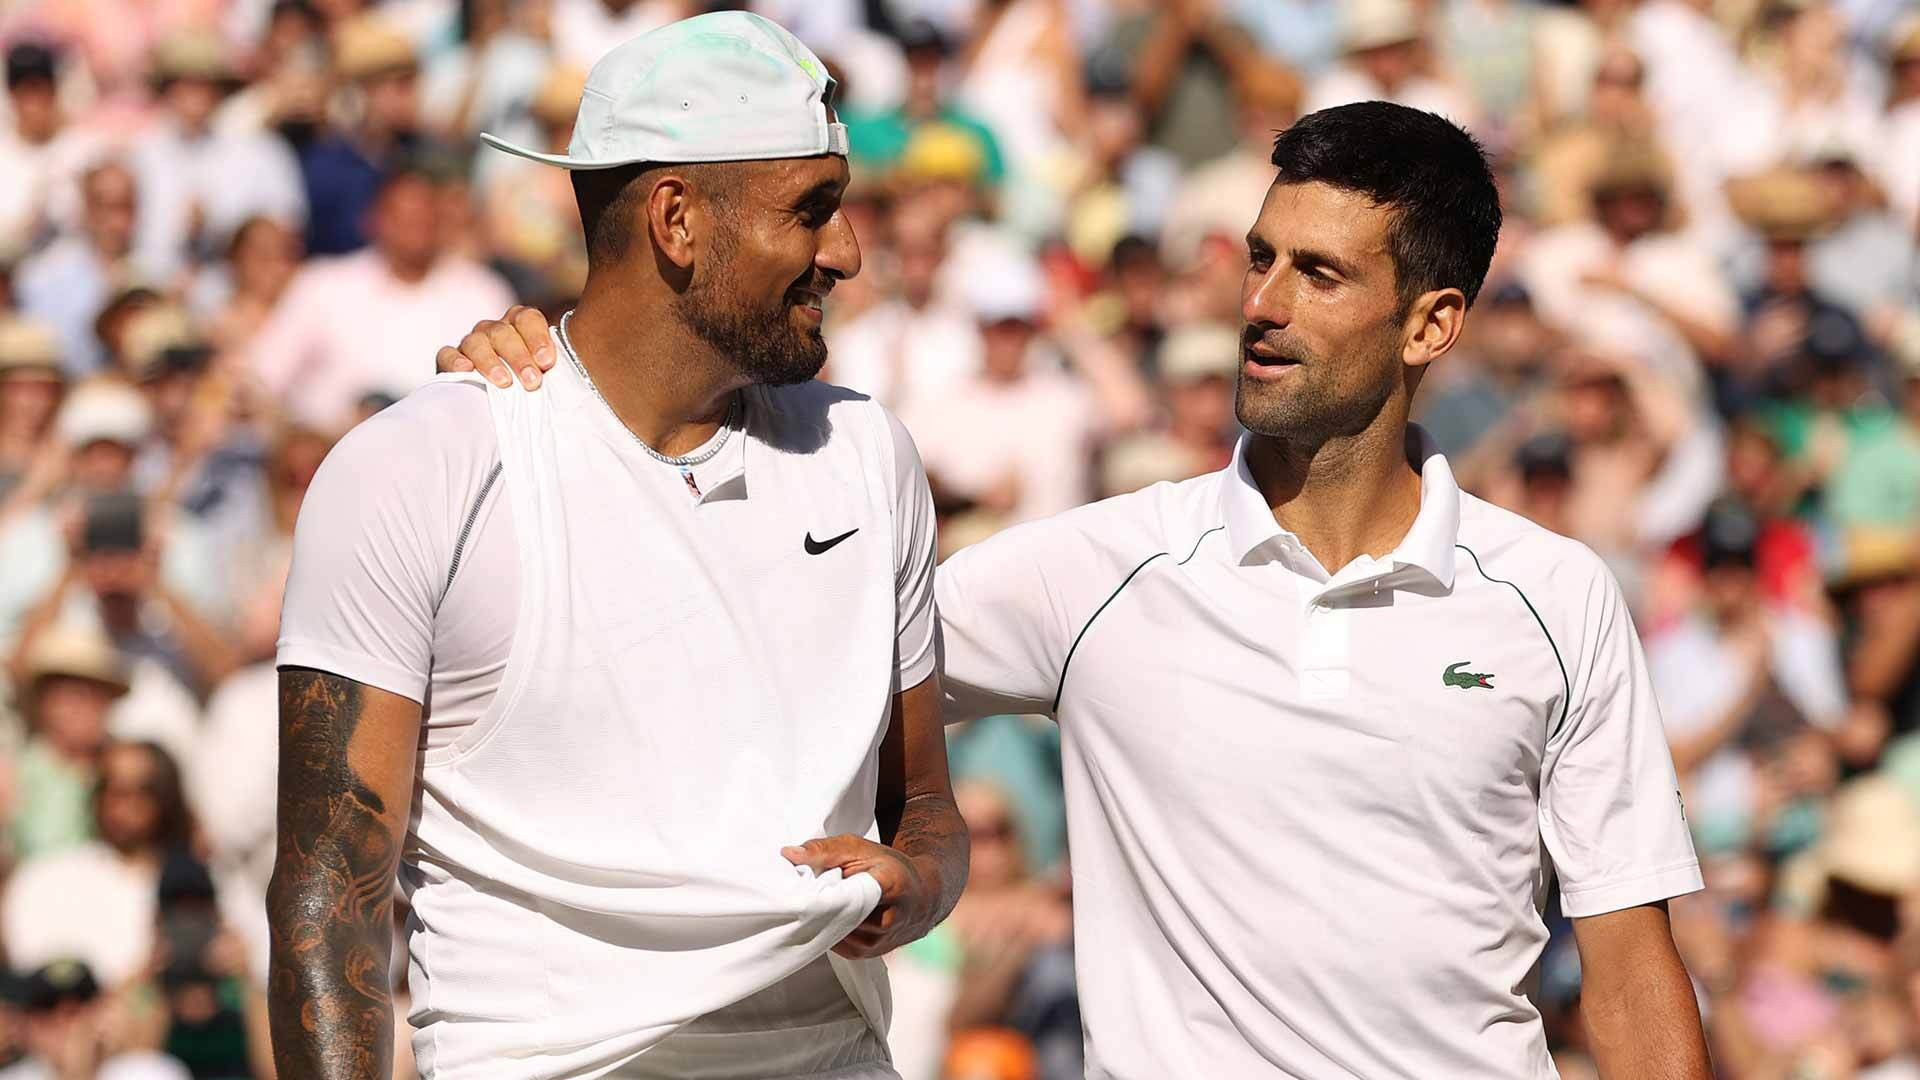 Djokovic needs to be playing at all costs, says Kyrgios | The Express Tribune